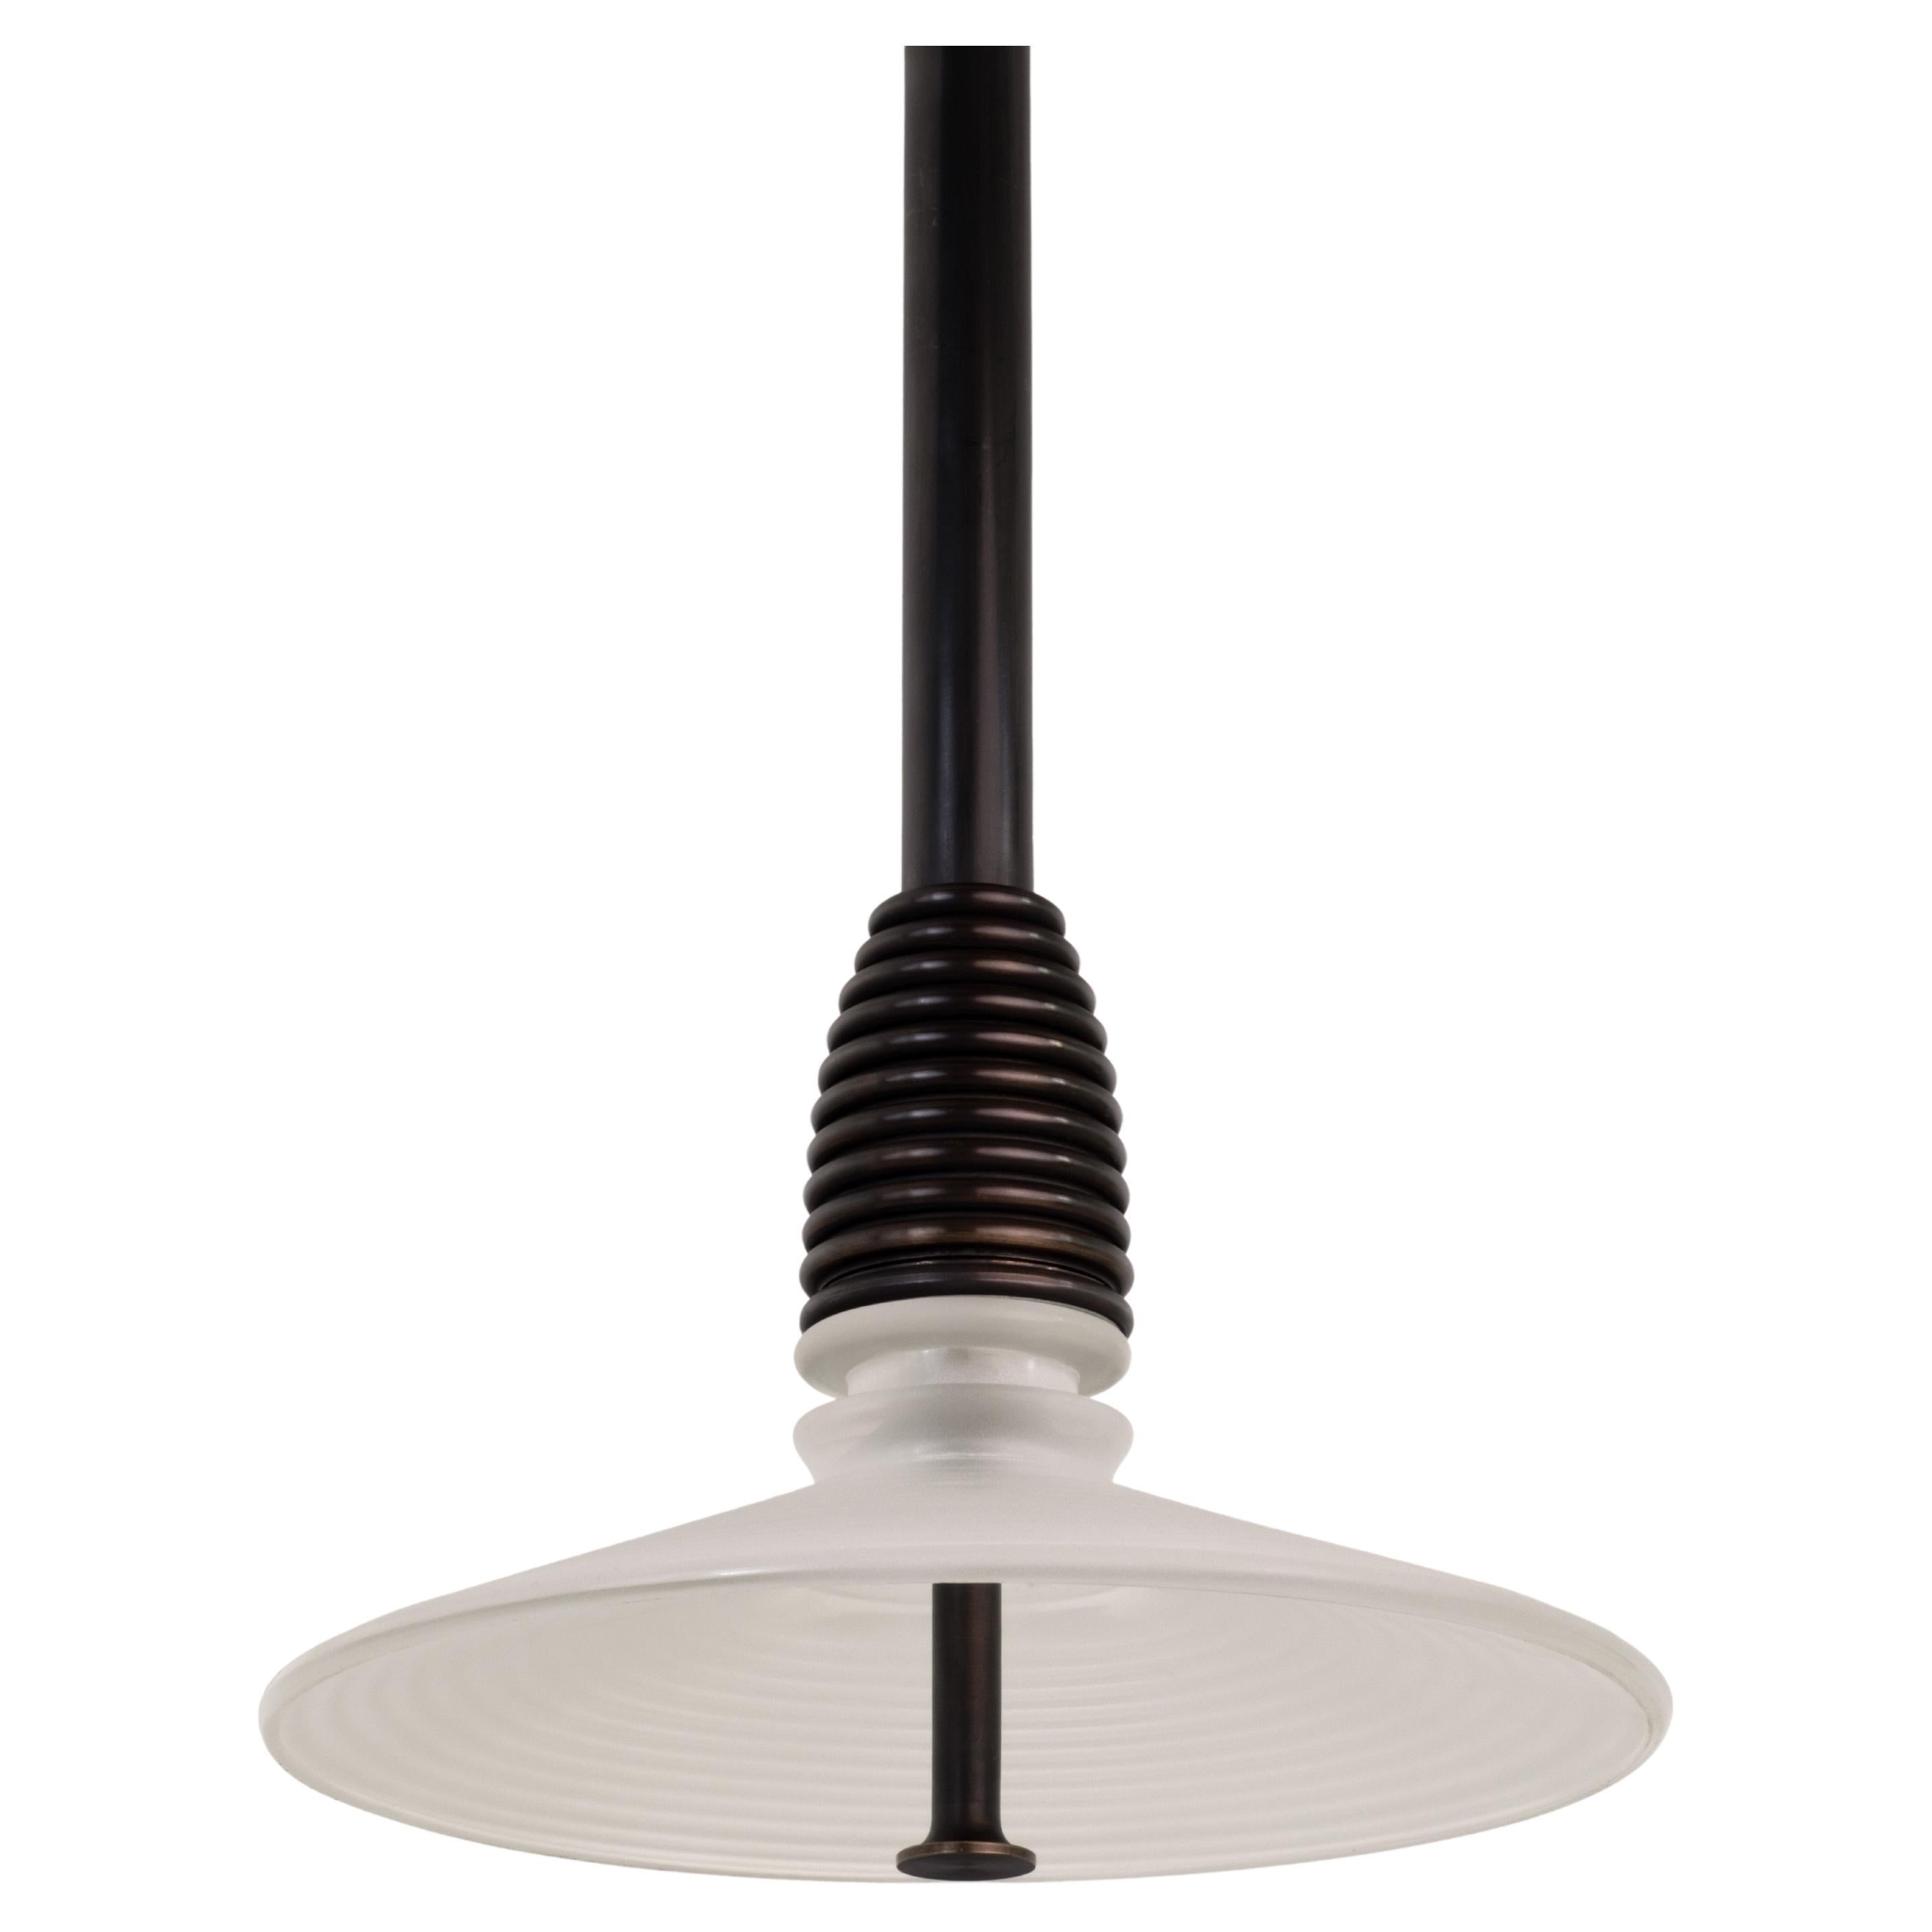 The Insulator 'B' Pendant in dark brass and frosted glass by NOVOCASTRIAN deco